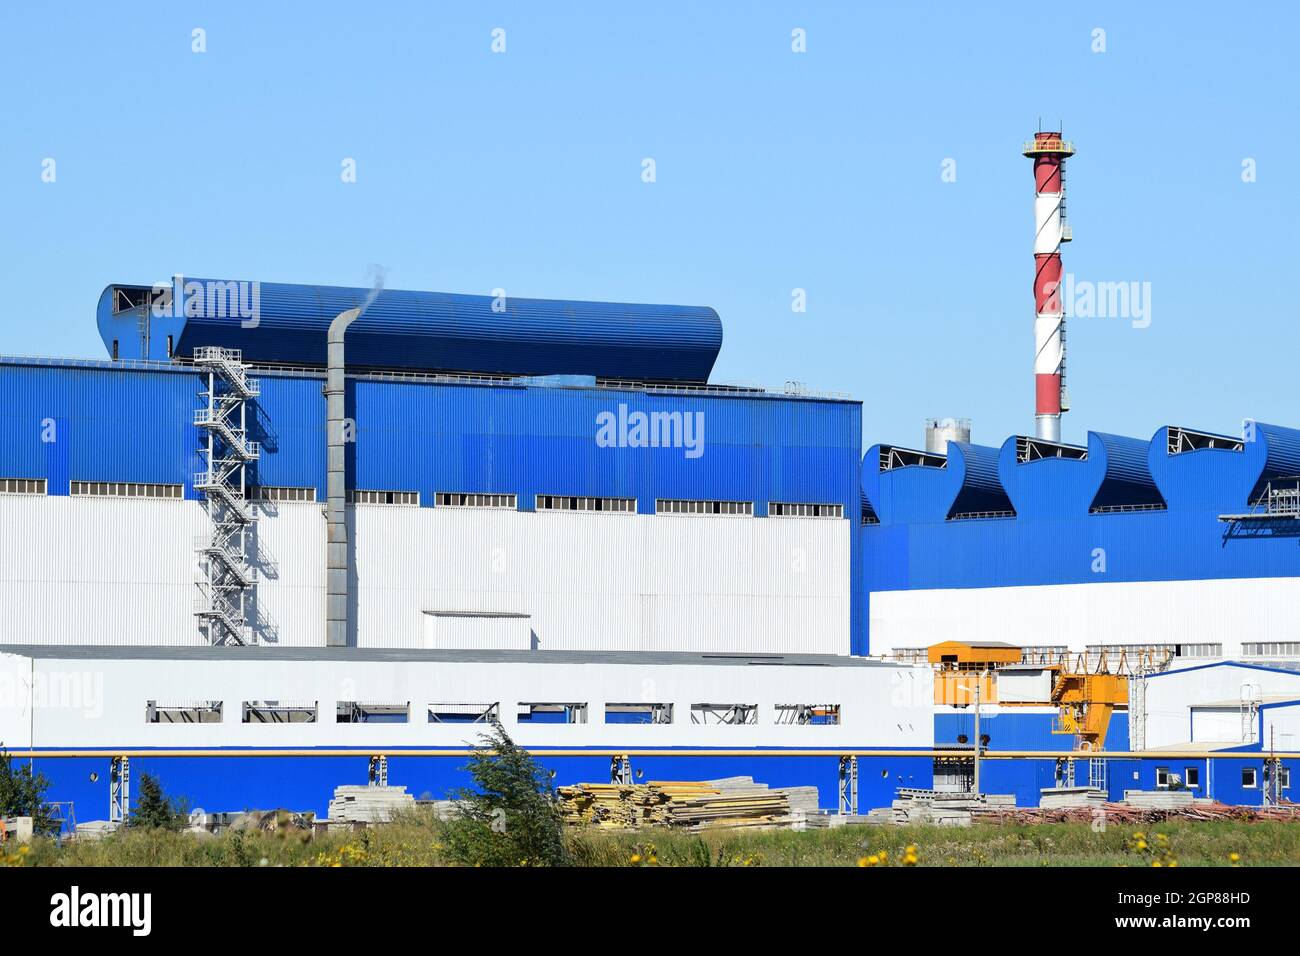 Big plant for processing scrap metal. Huge factory old metal refiner. Blue roof of the factory building. Exhaust pipes, radiators, cooling industrial Stock Photo